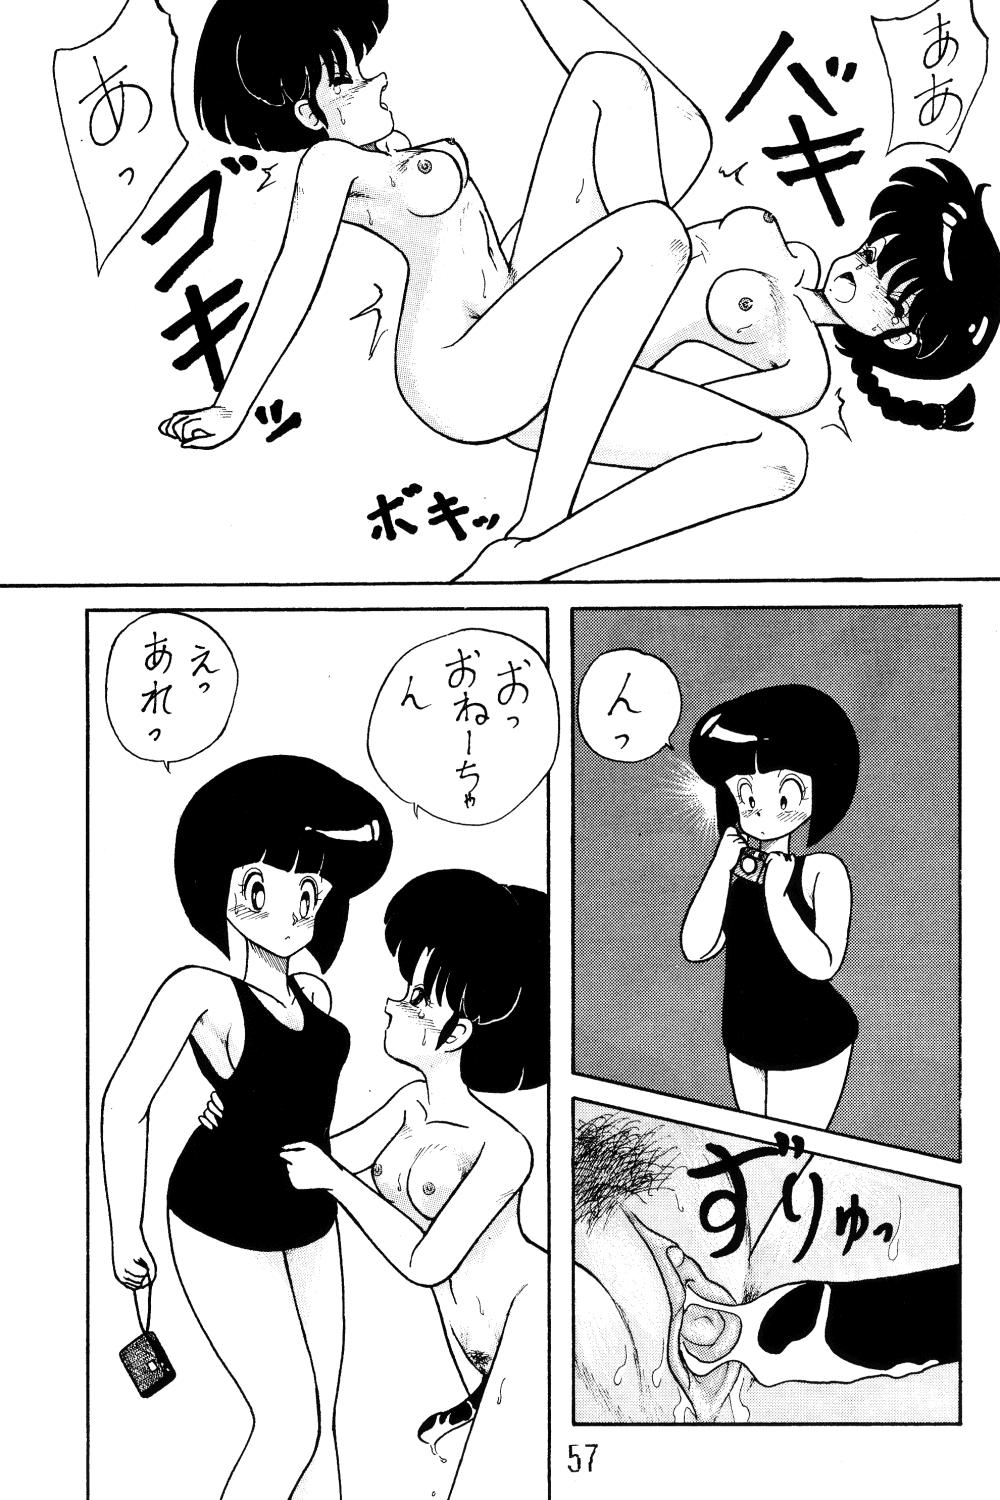 NOTORIOUS Ranma 1/2 Special 55